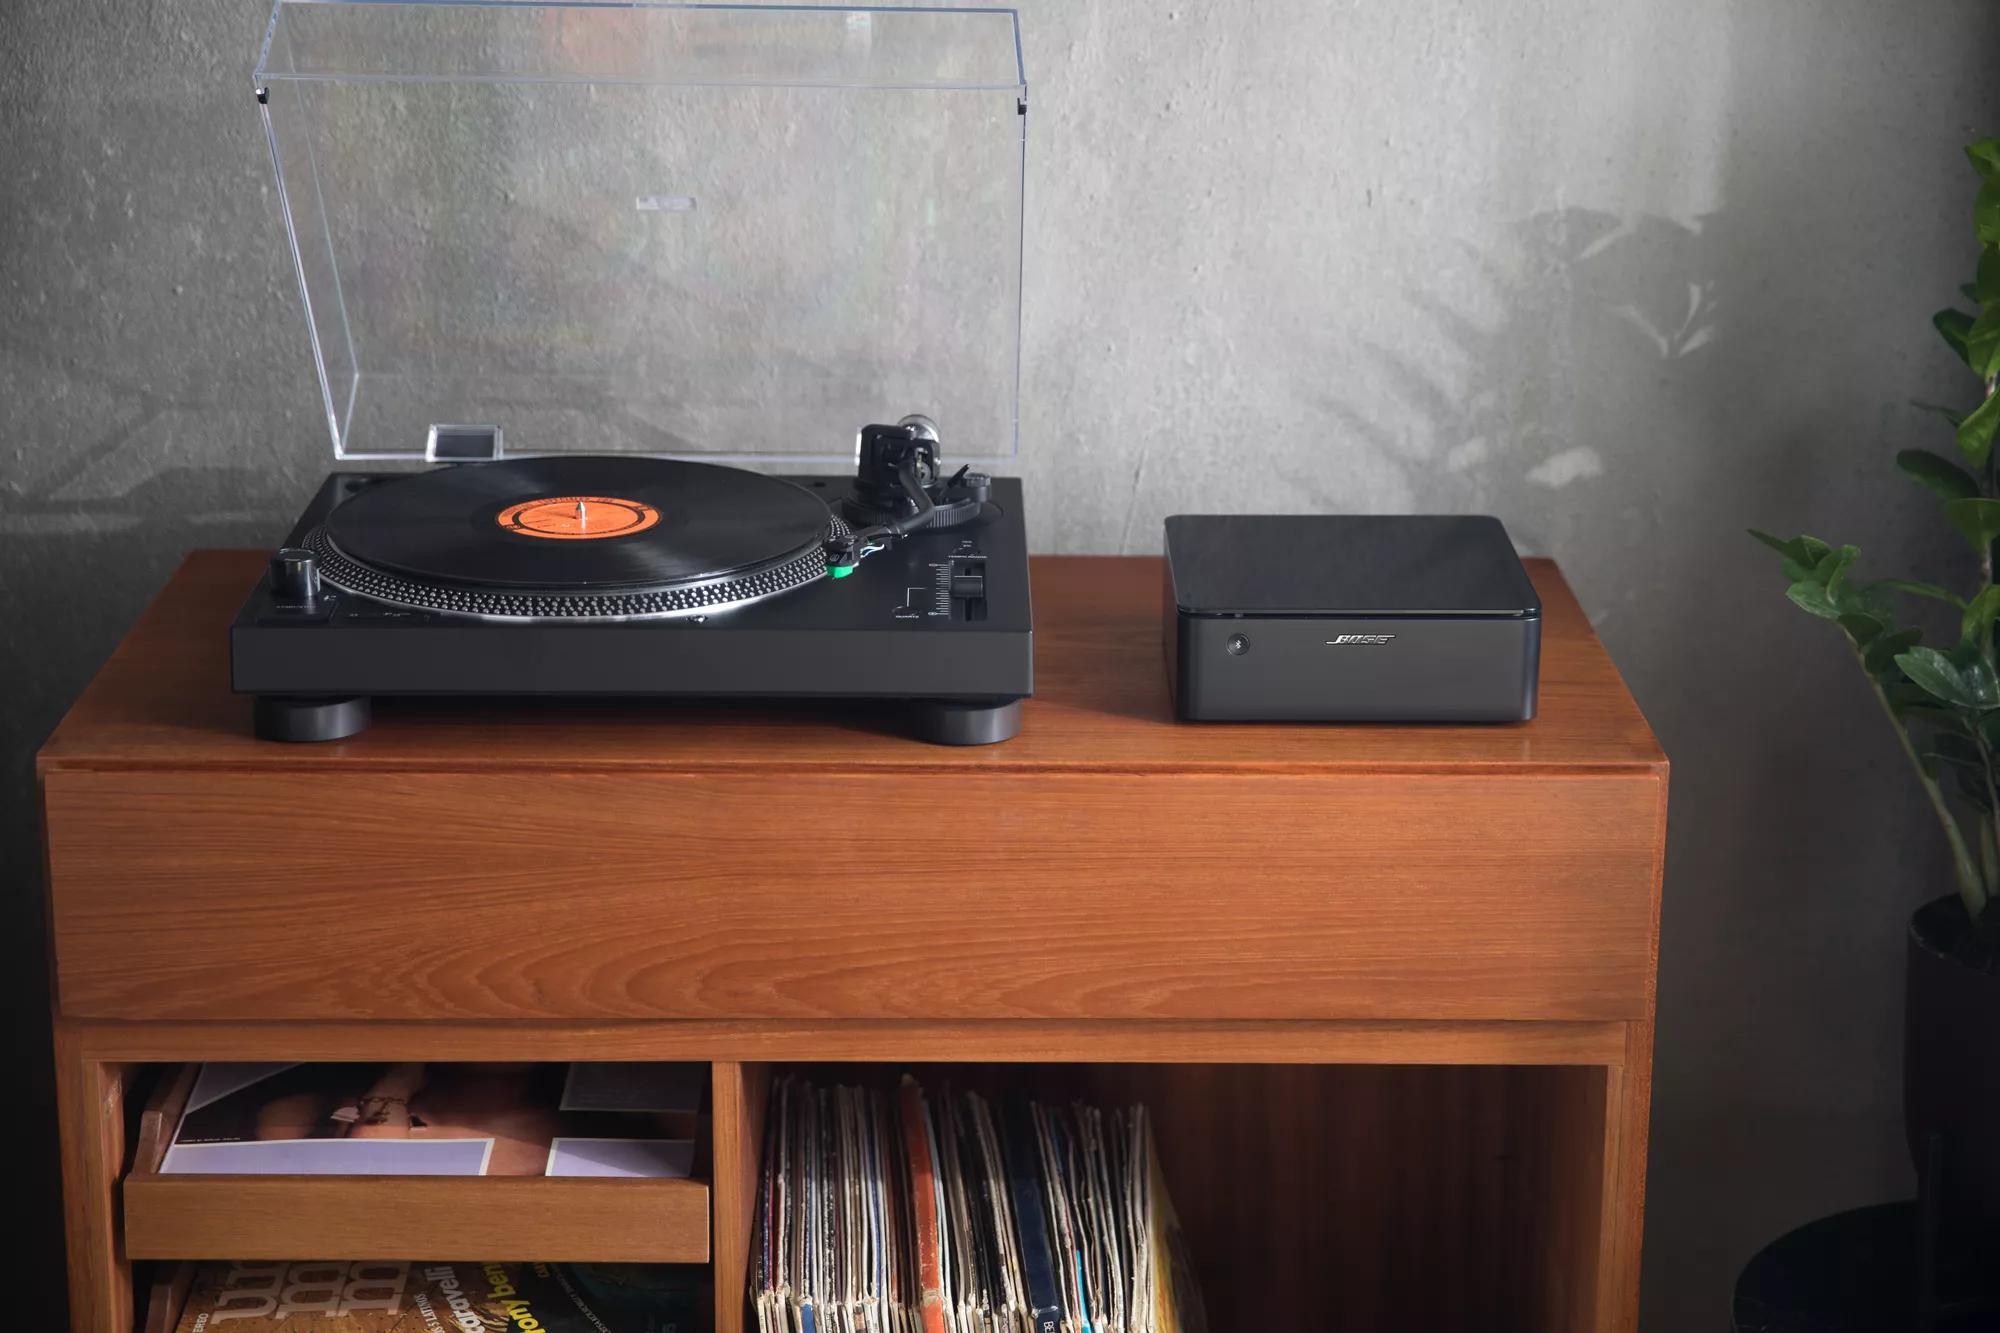 Bose Music Amplifier on a console next to a record player